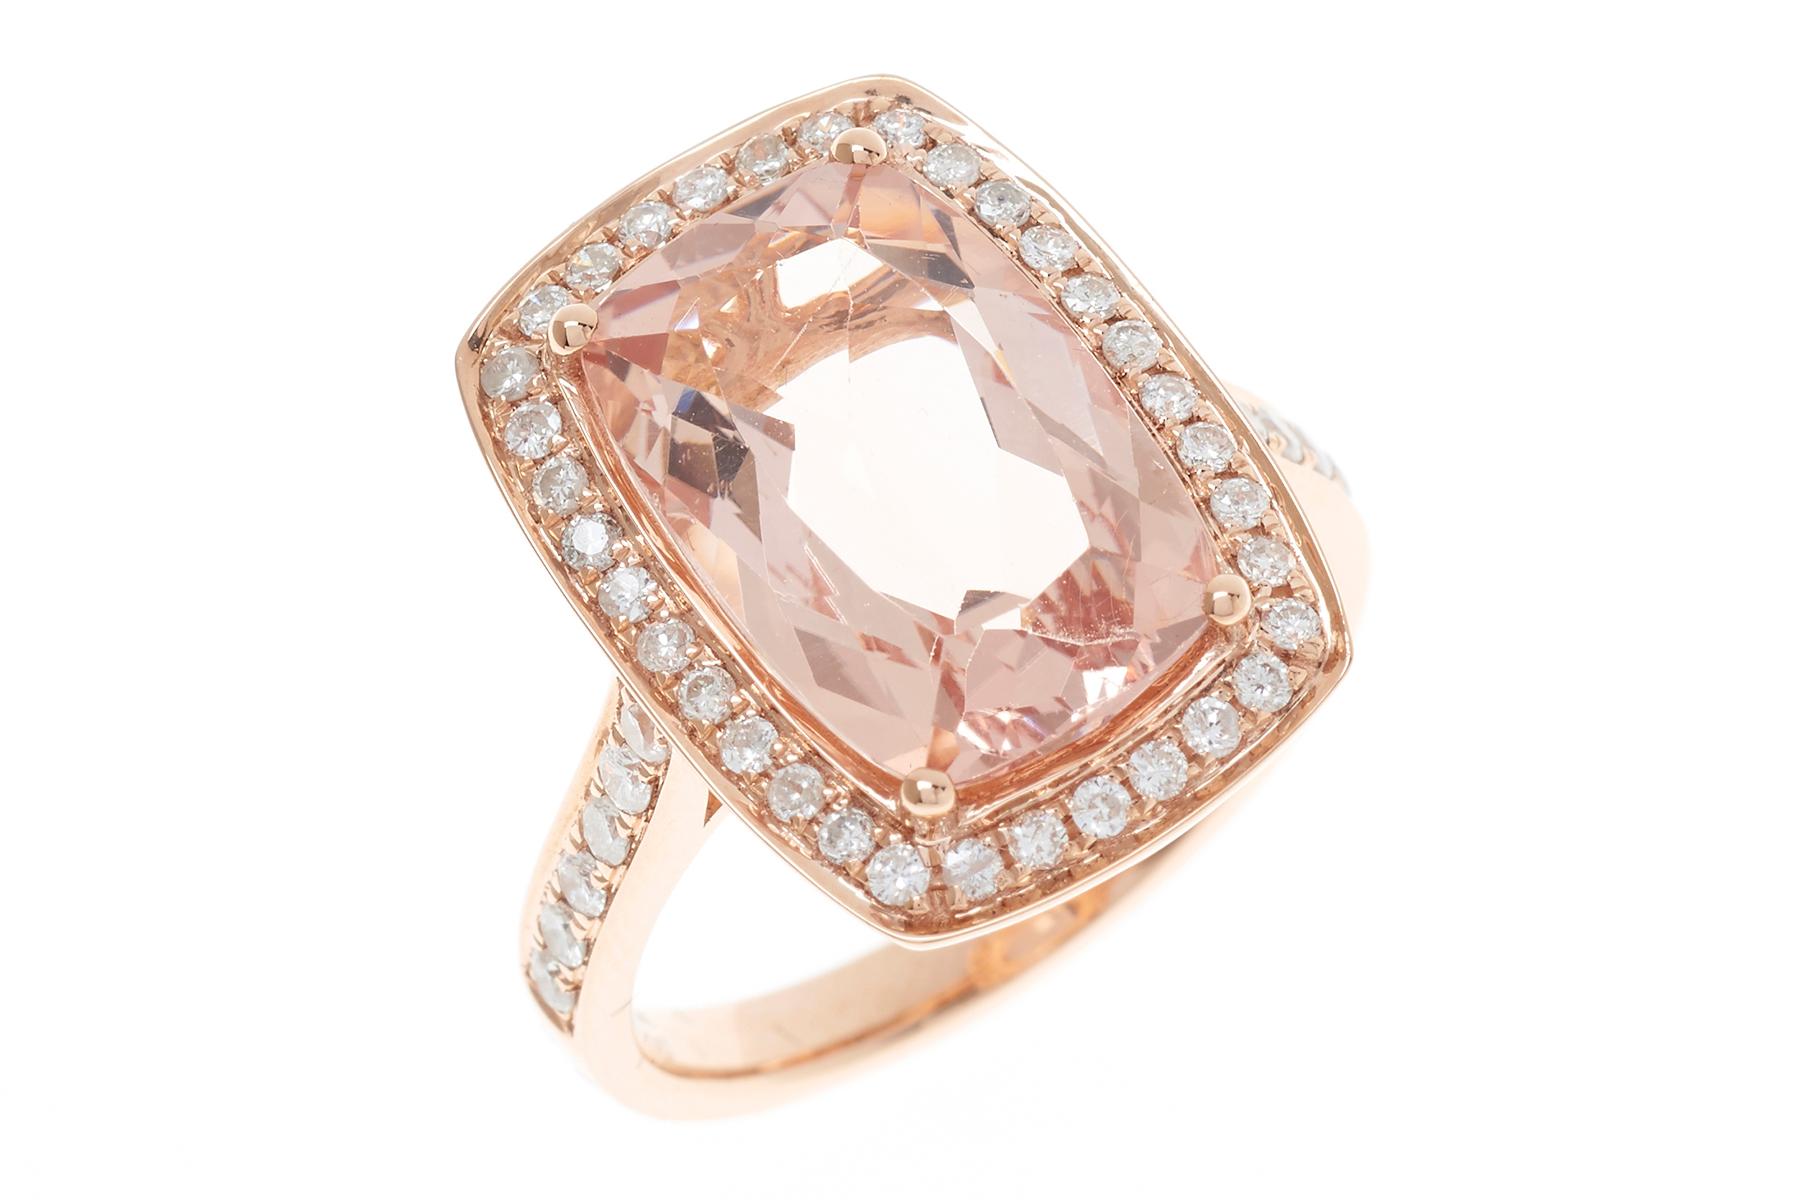 Morganite 5.16 Carat Diamond 18 Rose Gold Dress Ring In New Condition For Sale In Sydney, AU